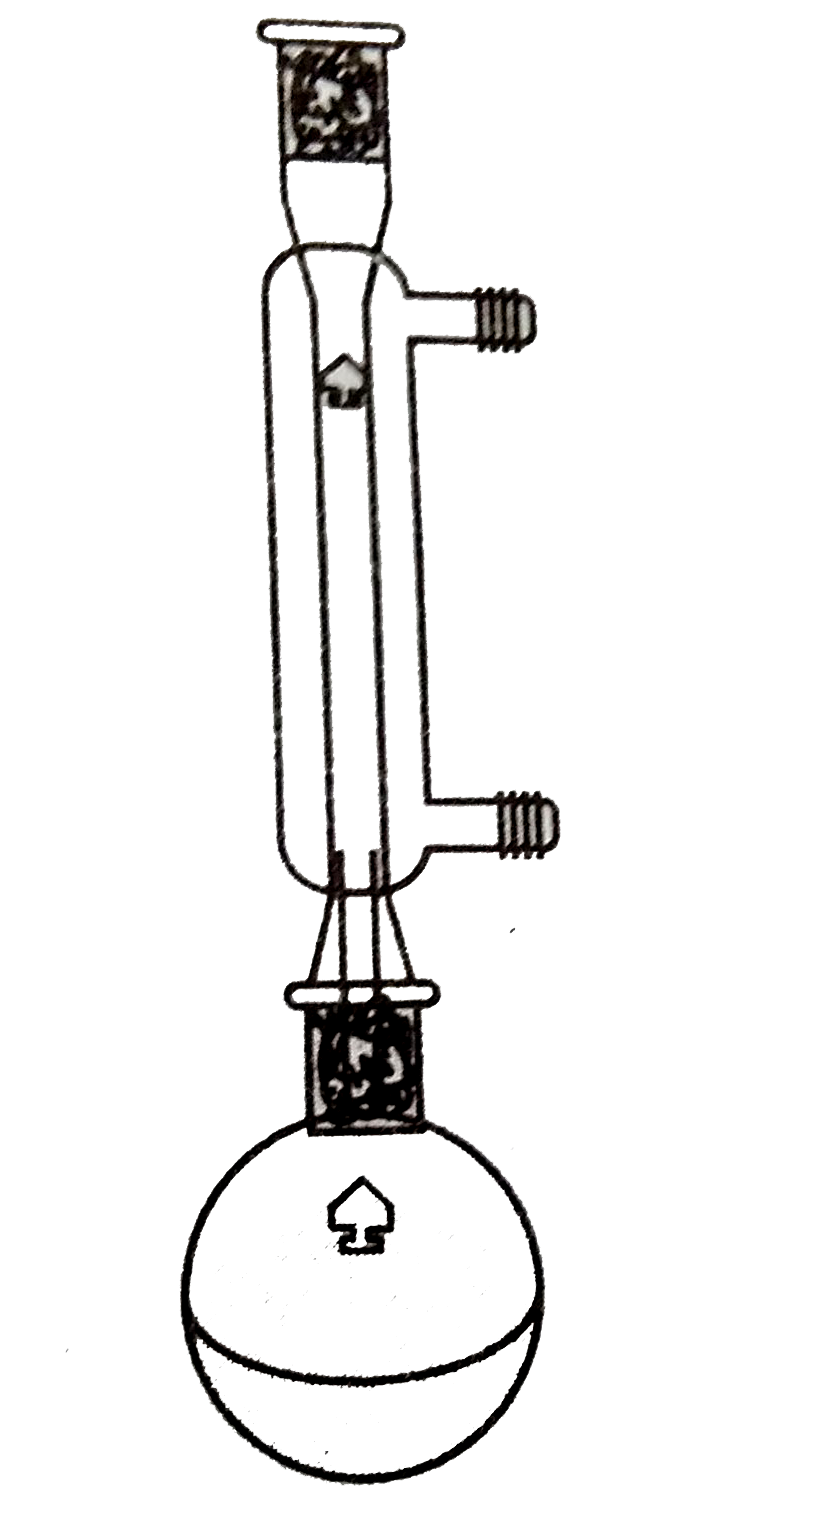 The apparatus shown would be used to: